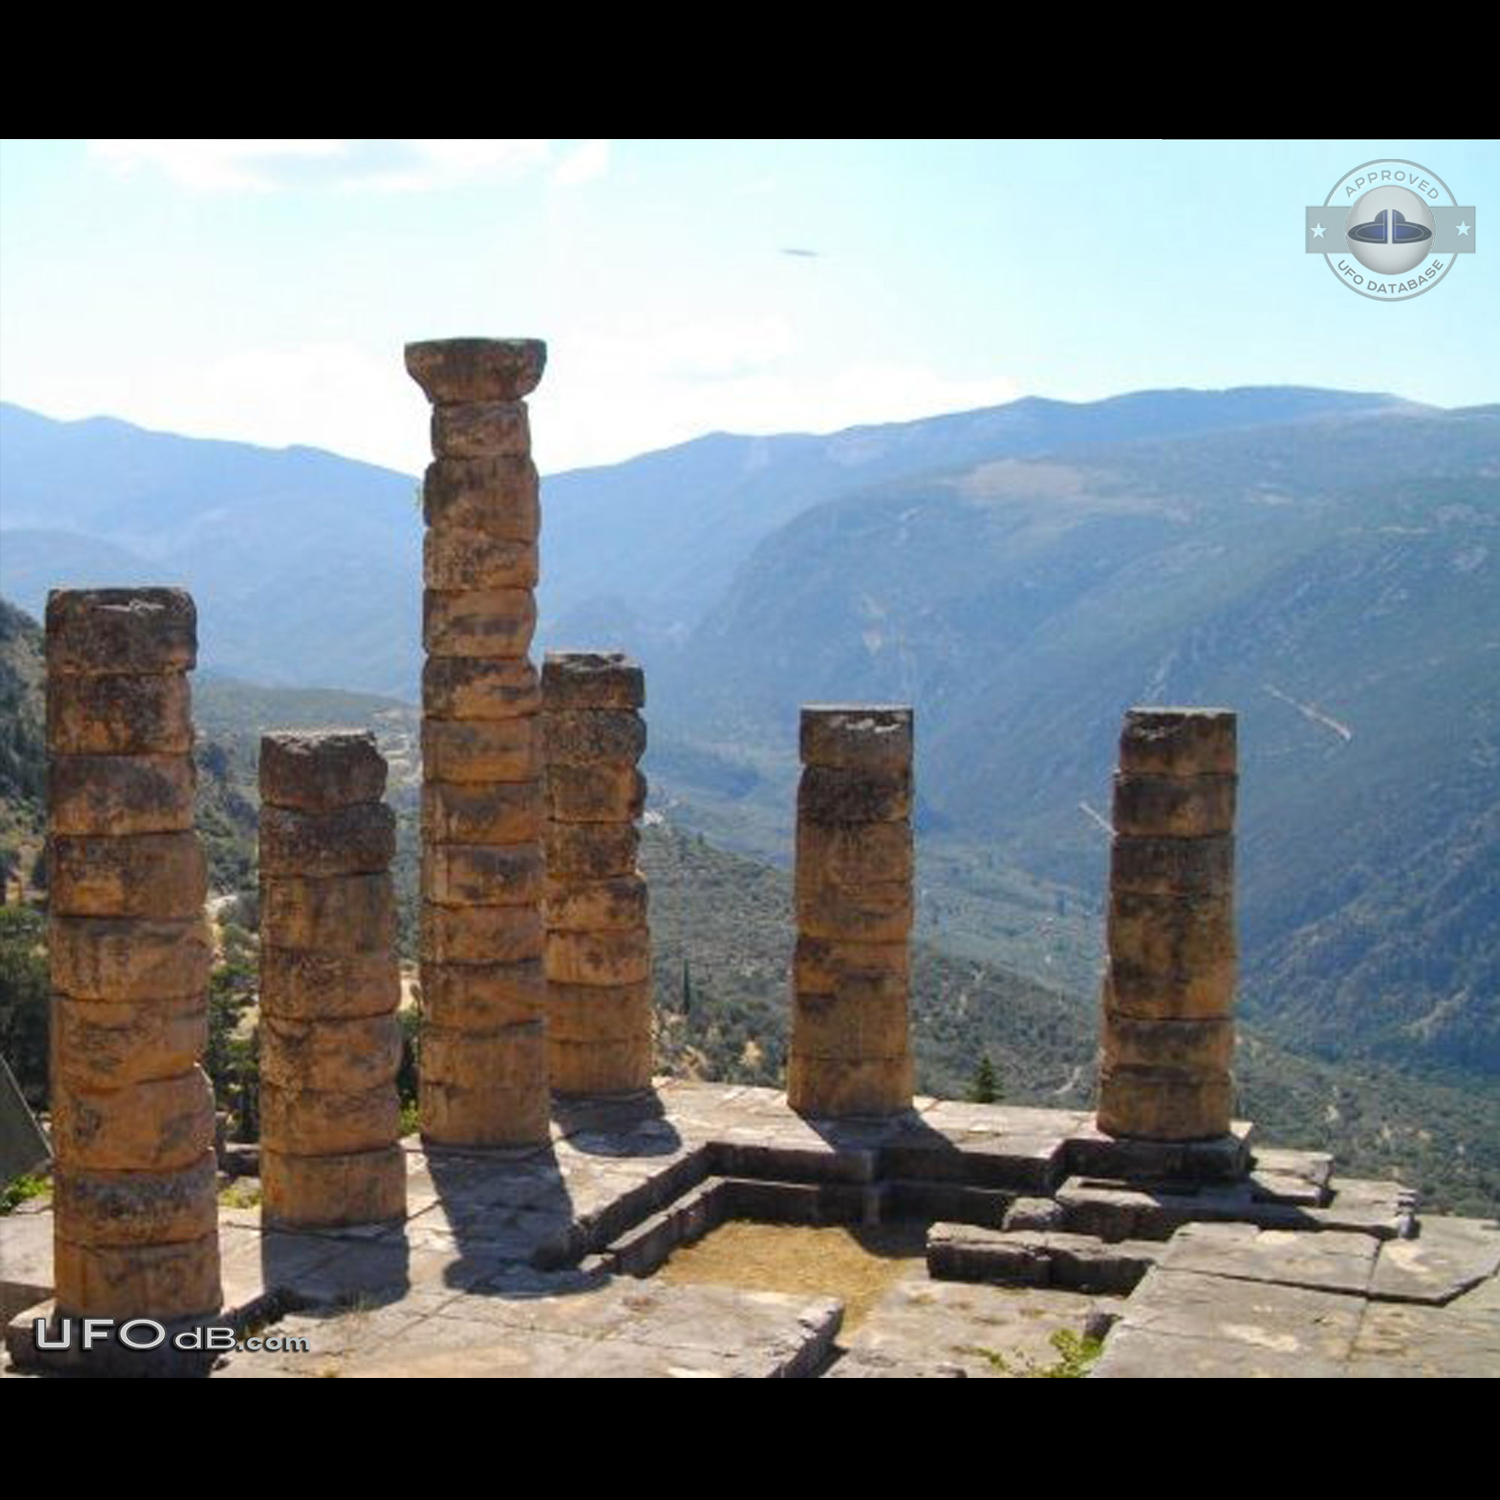 UFO picture showing saucer near Delphi Greece caught in June 3 2012 UFO Picture #449-1